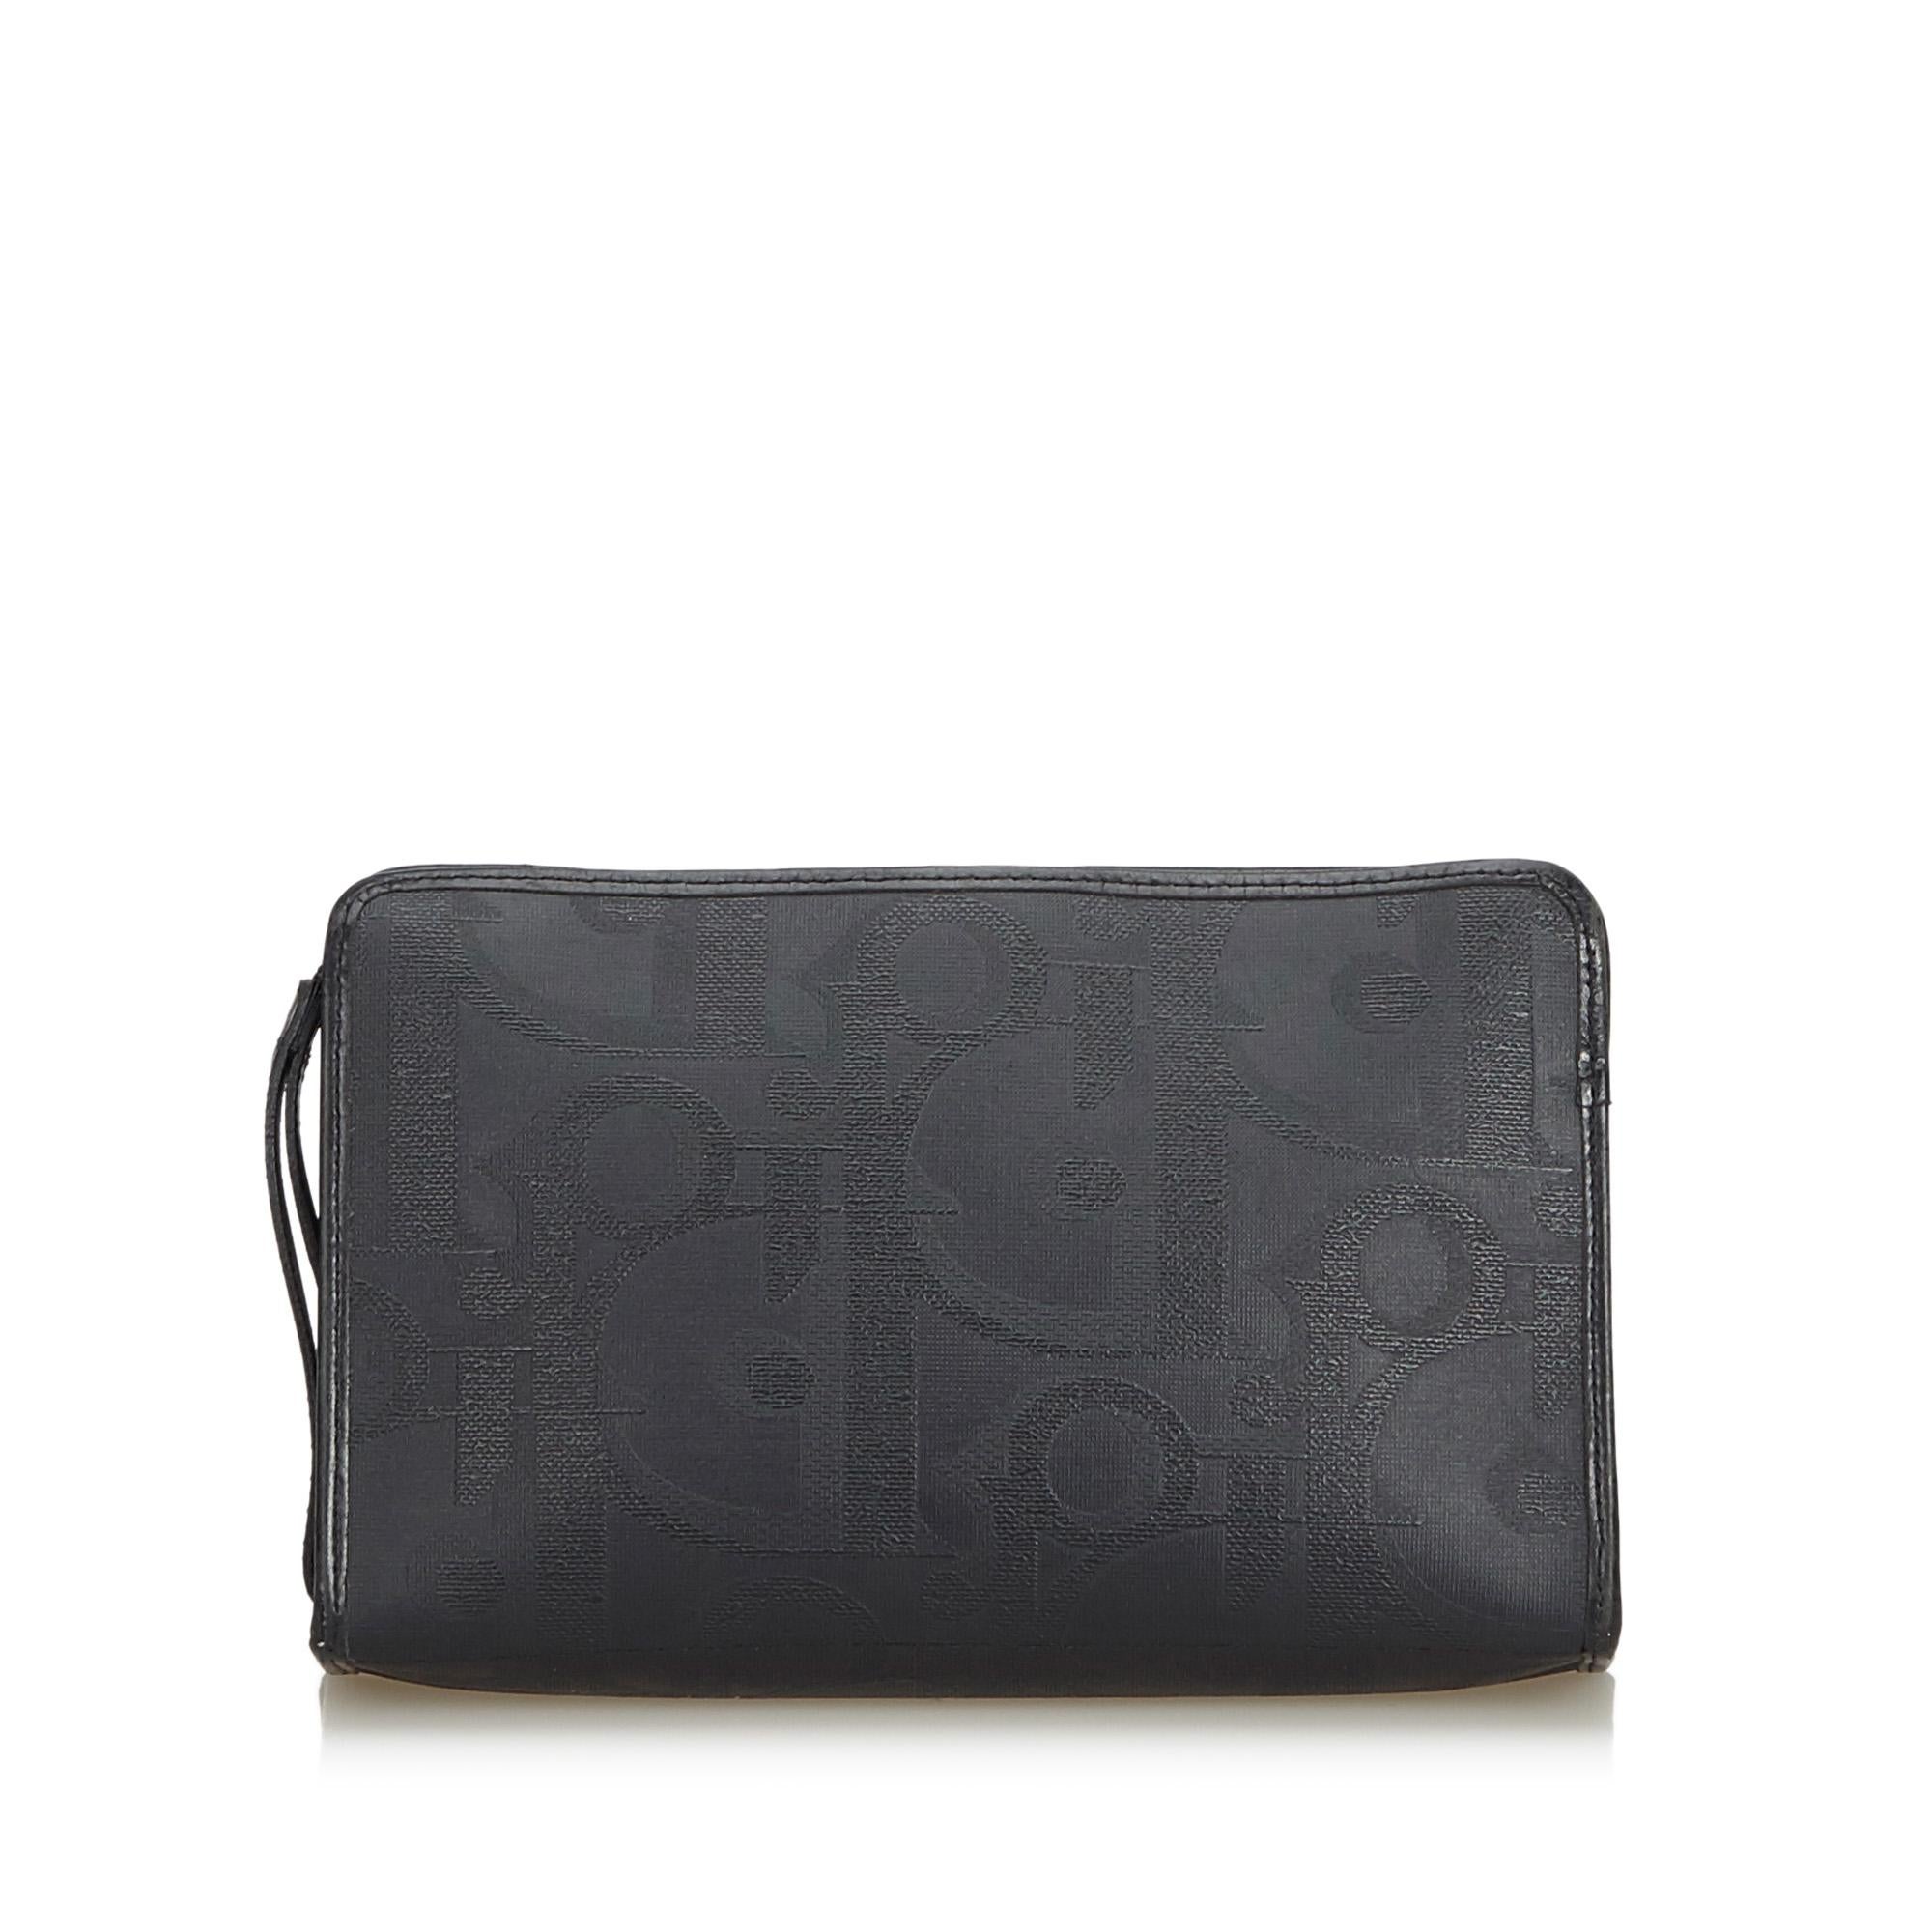 Dior Black Coated Canvas Fabric Oblique Clutch Bag France In Good Condition For Sale In Orlando, FL